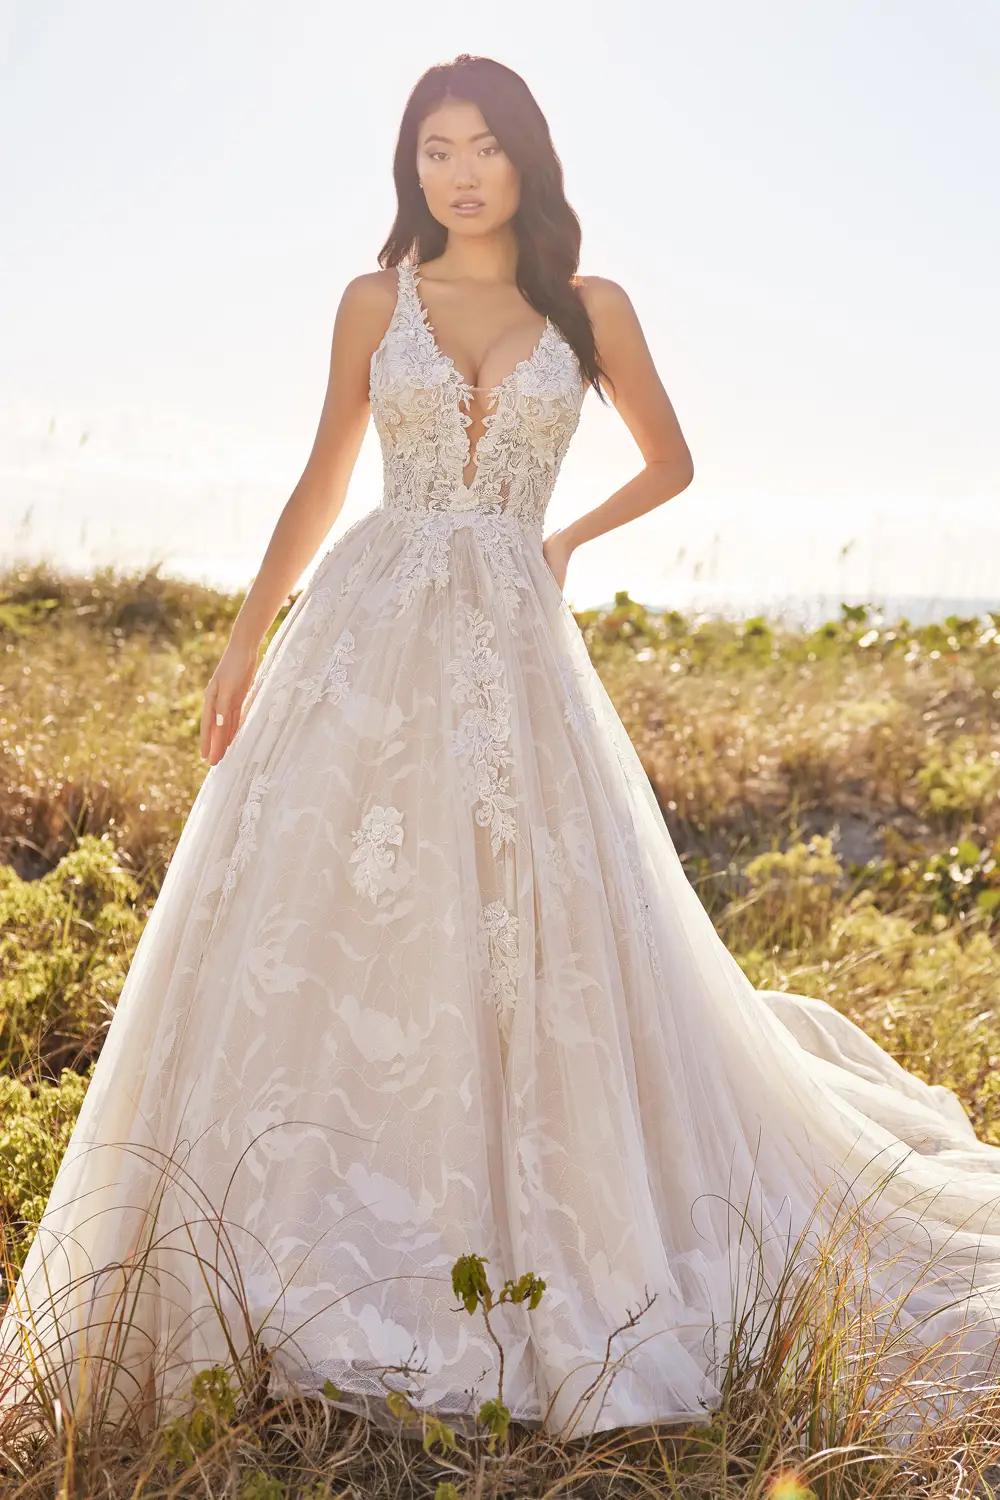 Formal Ball Gowns, Plus-Sized Ball Gowns